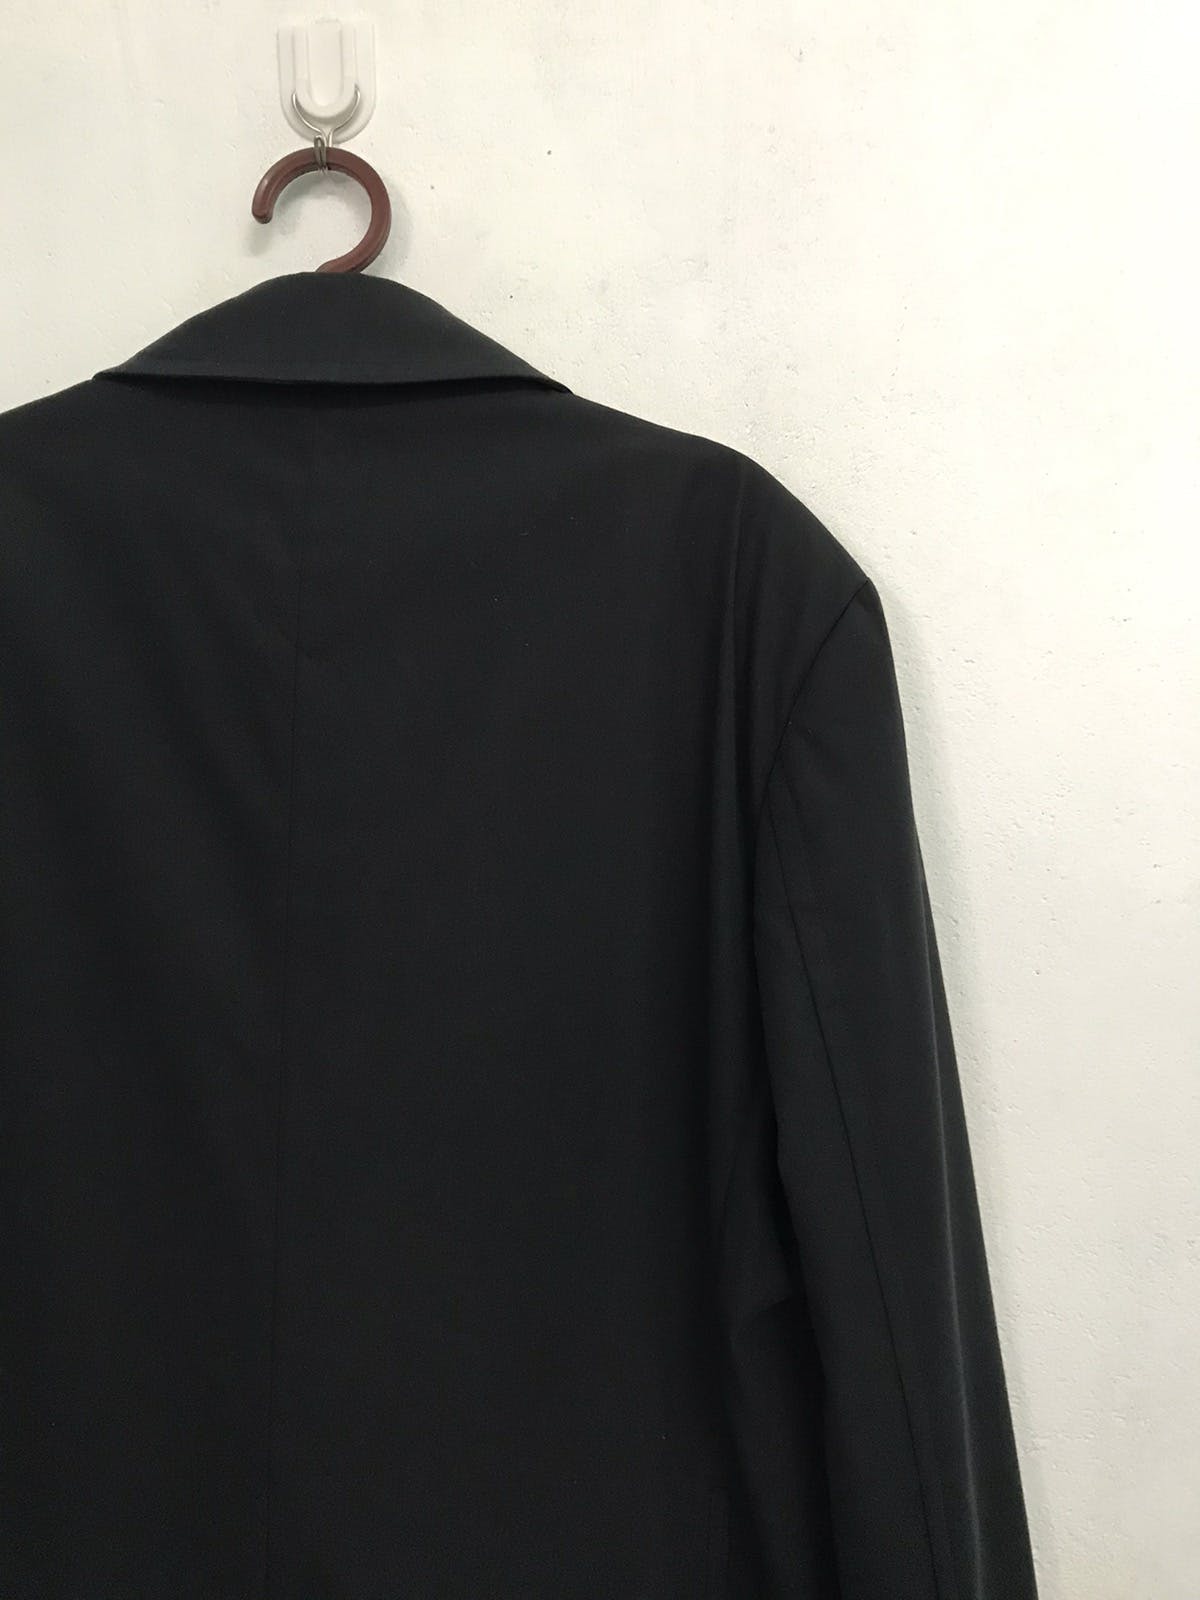 Gucci Long Coat/Jacket Made in Italy - 8